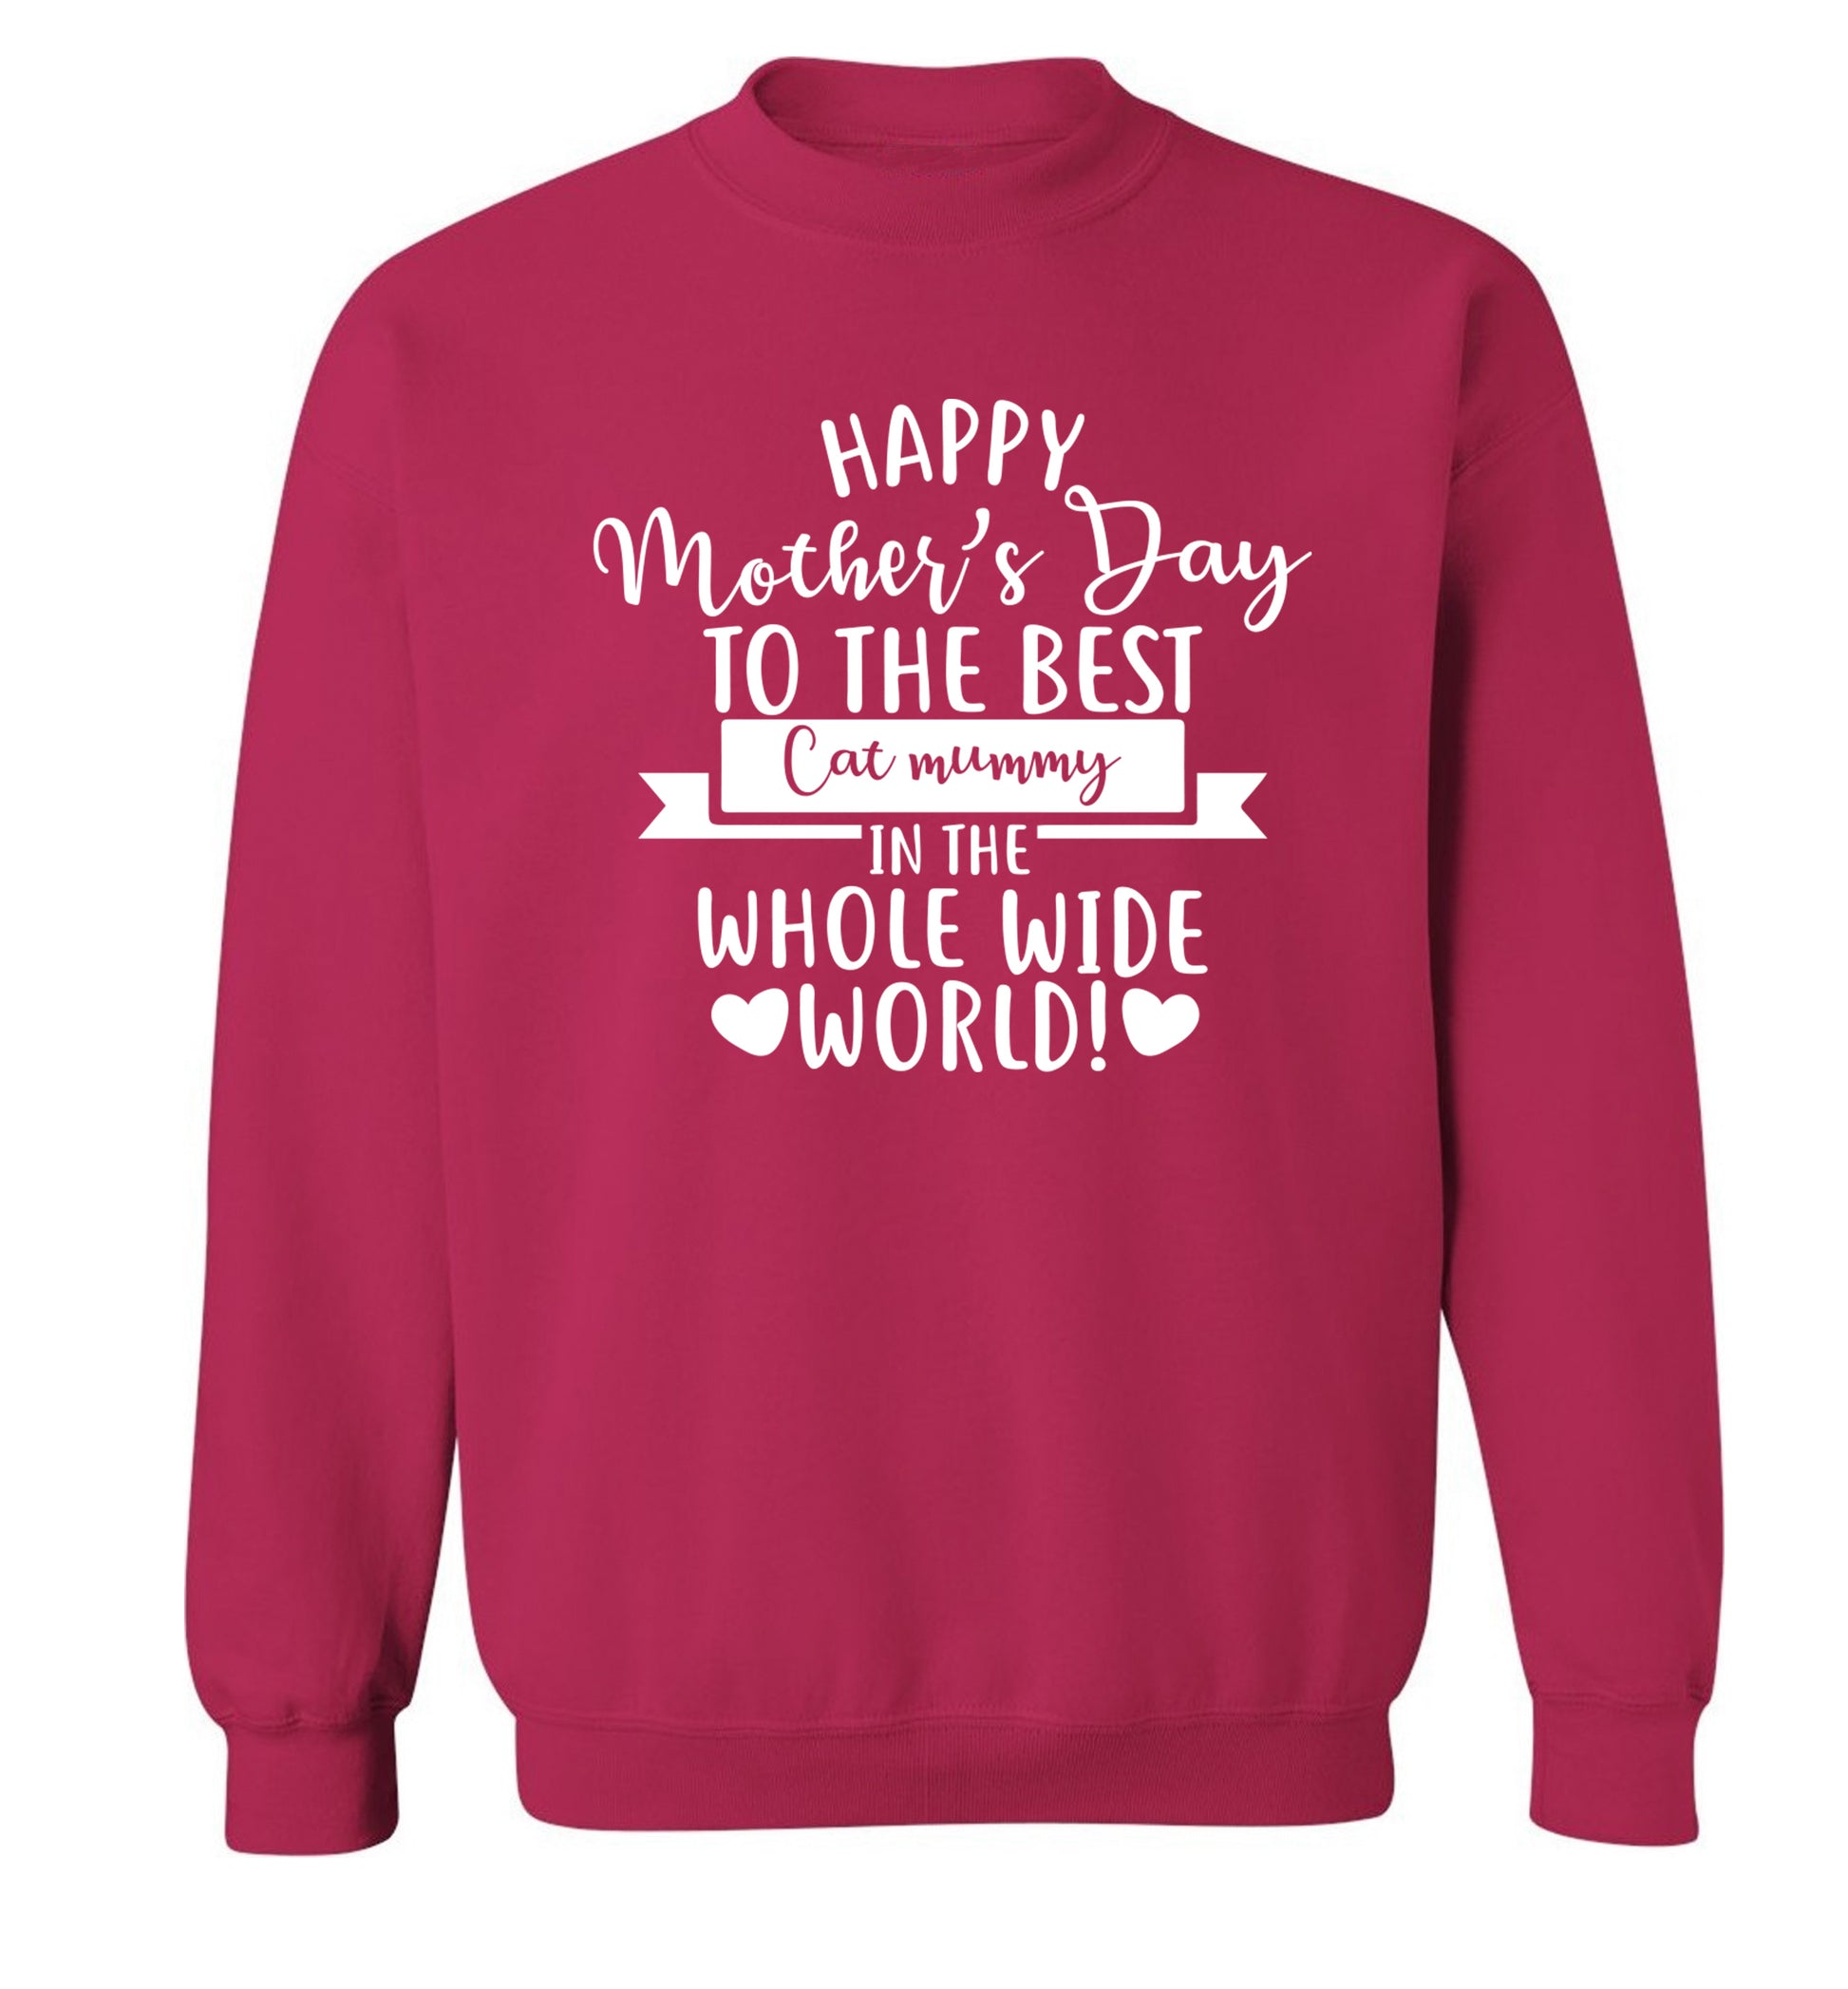 Happy mother's day to the best cat mummy in the world Adult's unisex pink Sweater 2XL